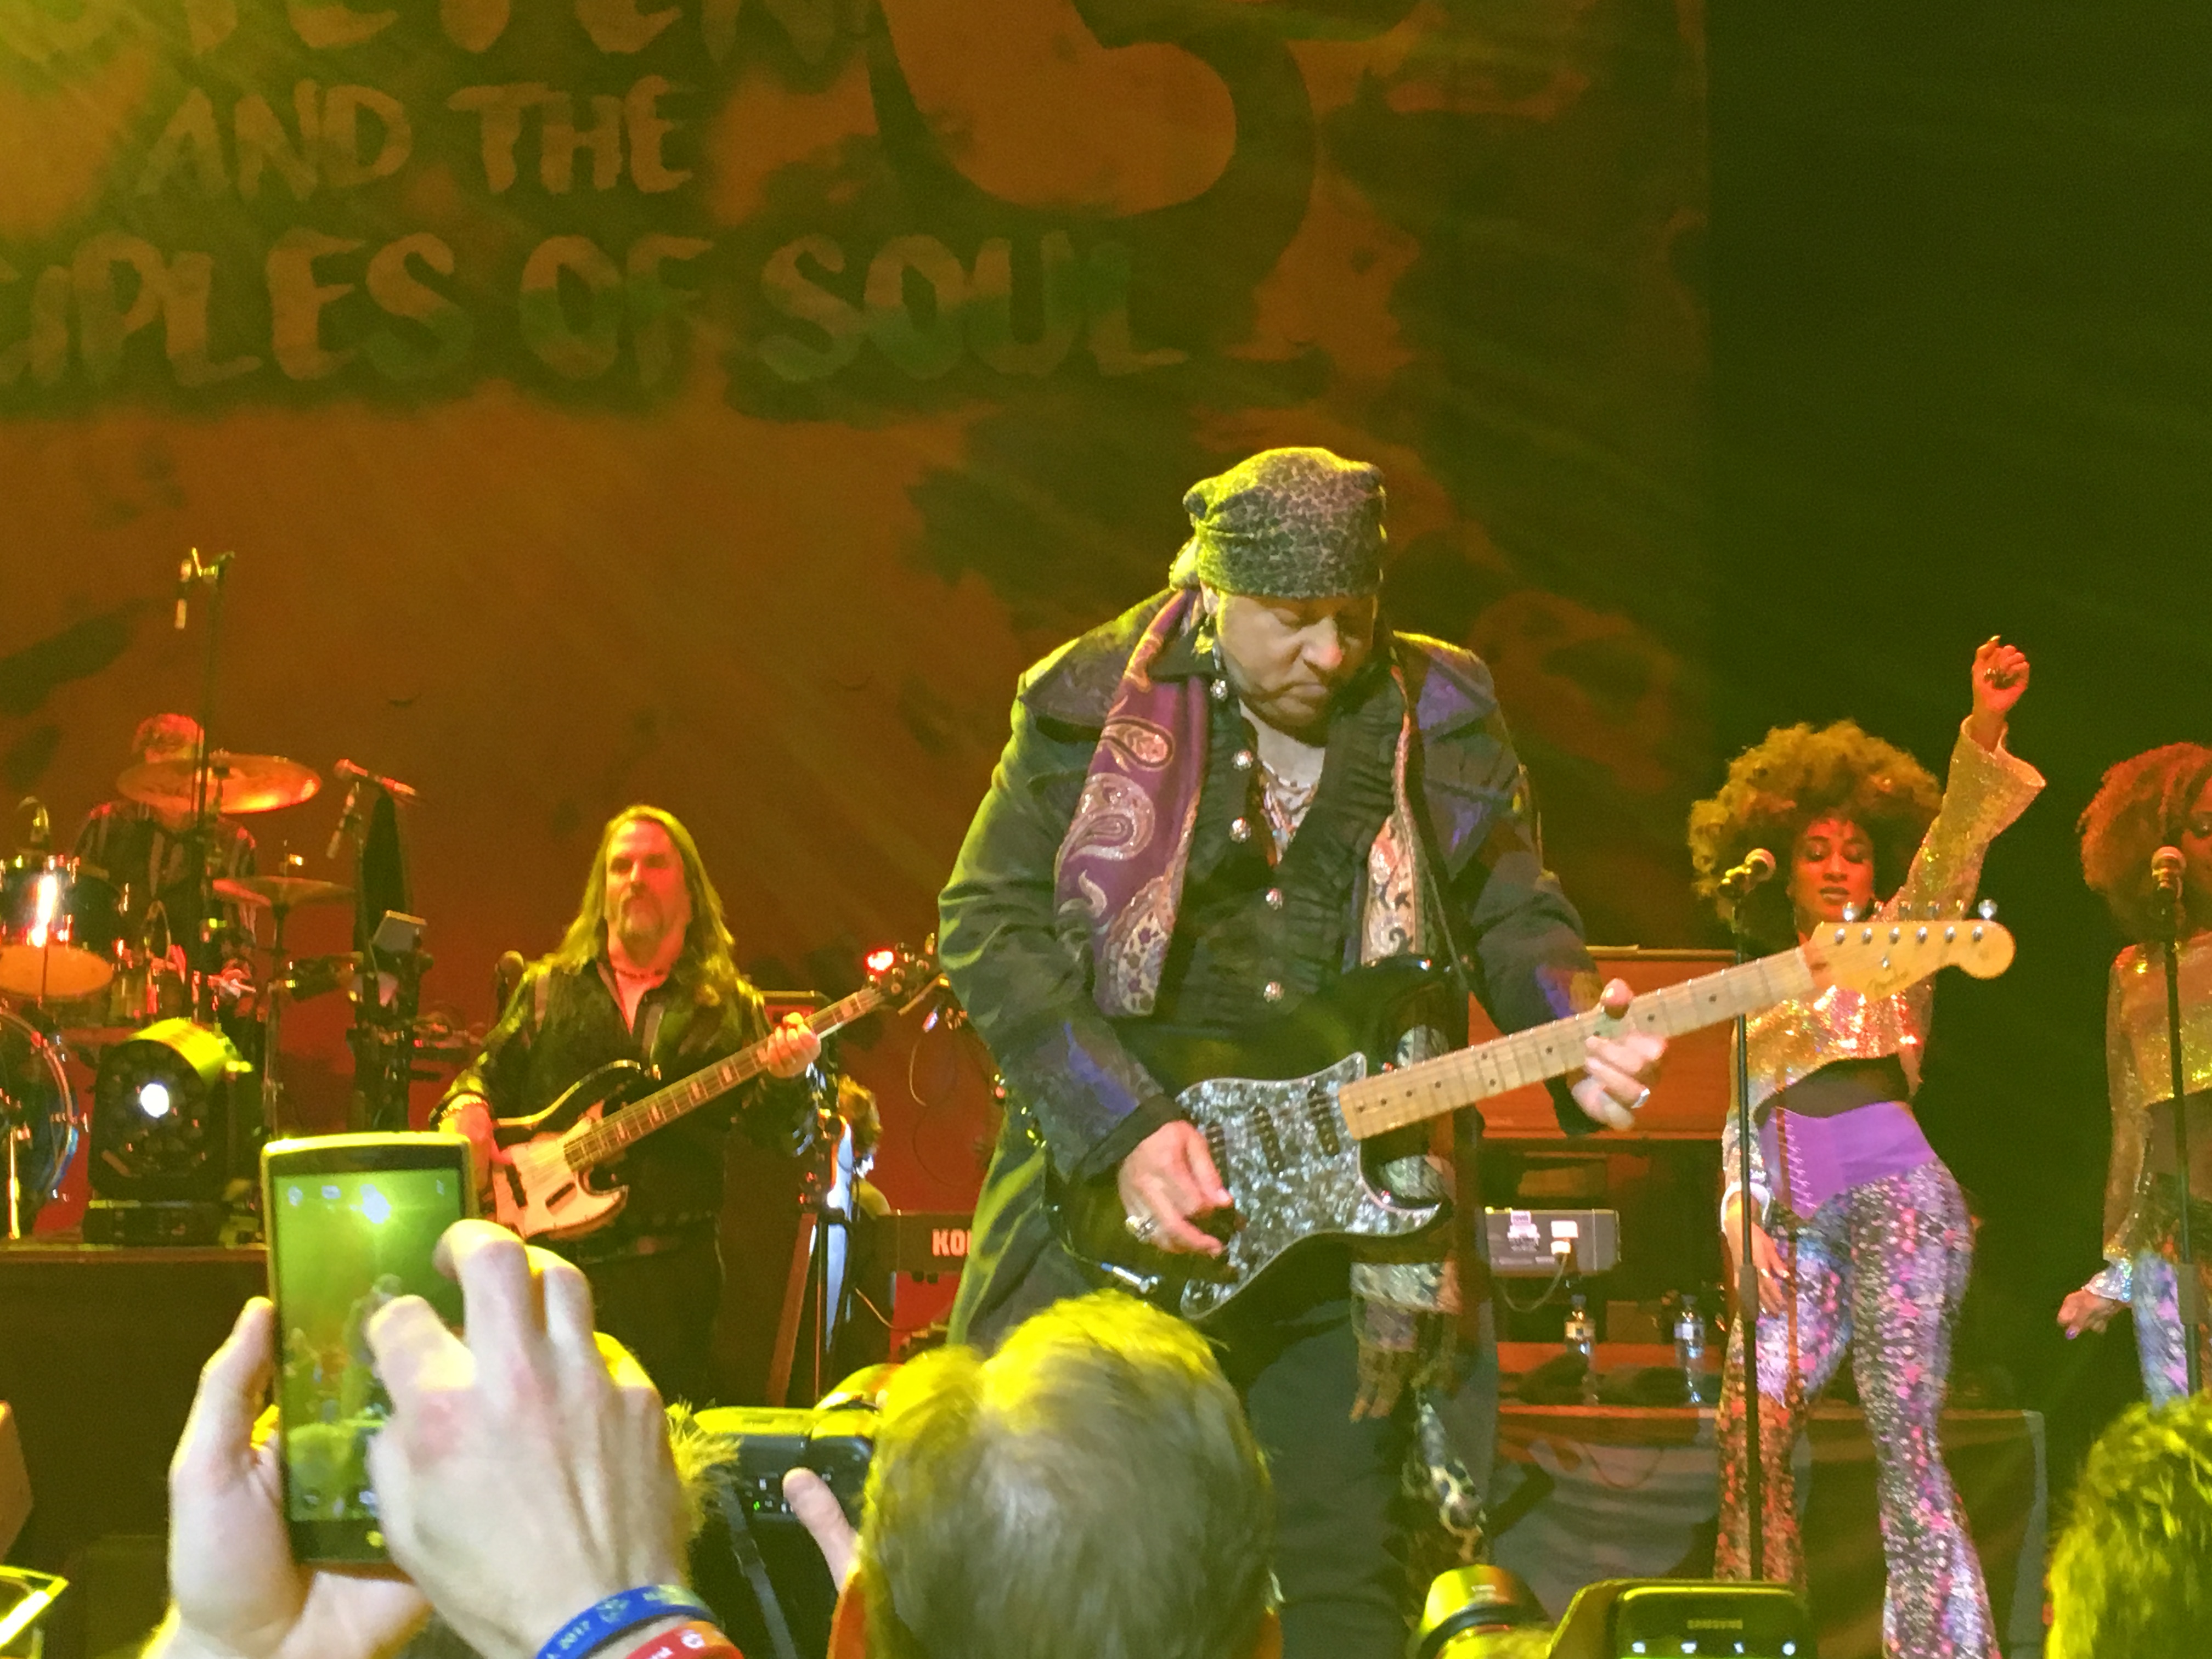 Concertreview: Little Steven & The Disciples of Soul – together we will make our stand